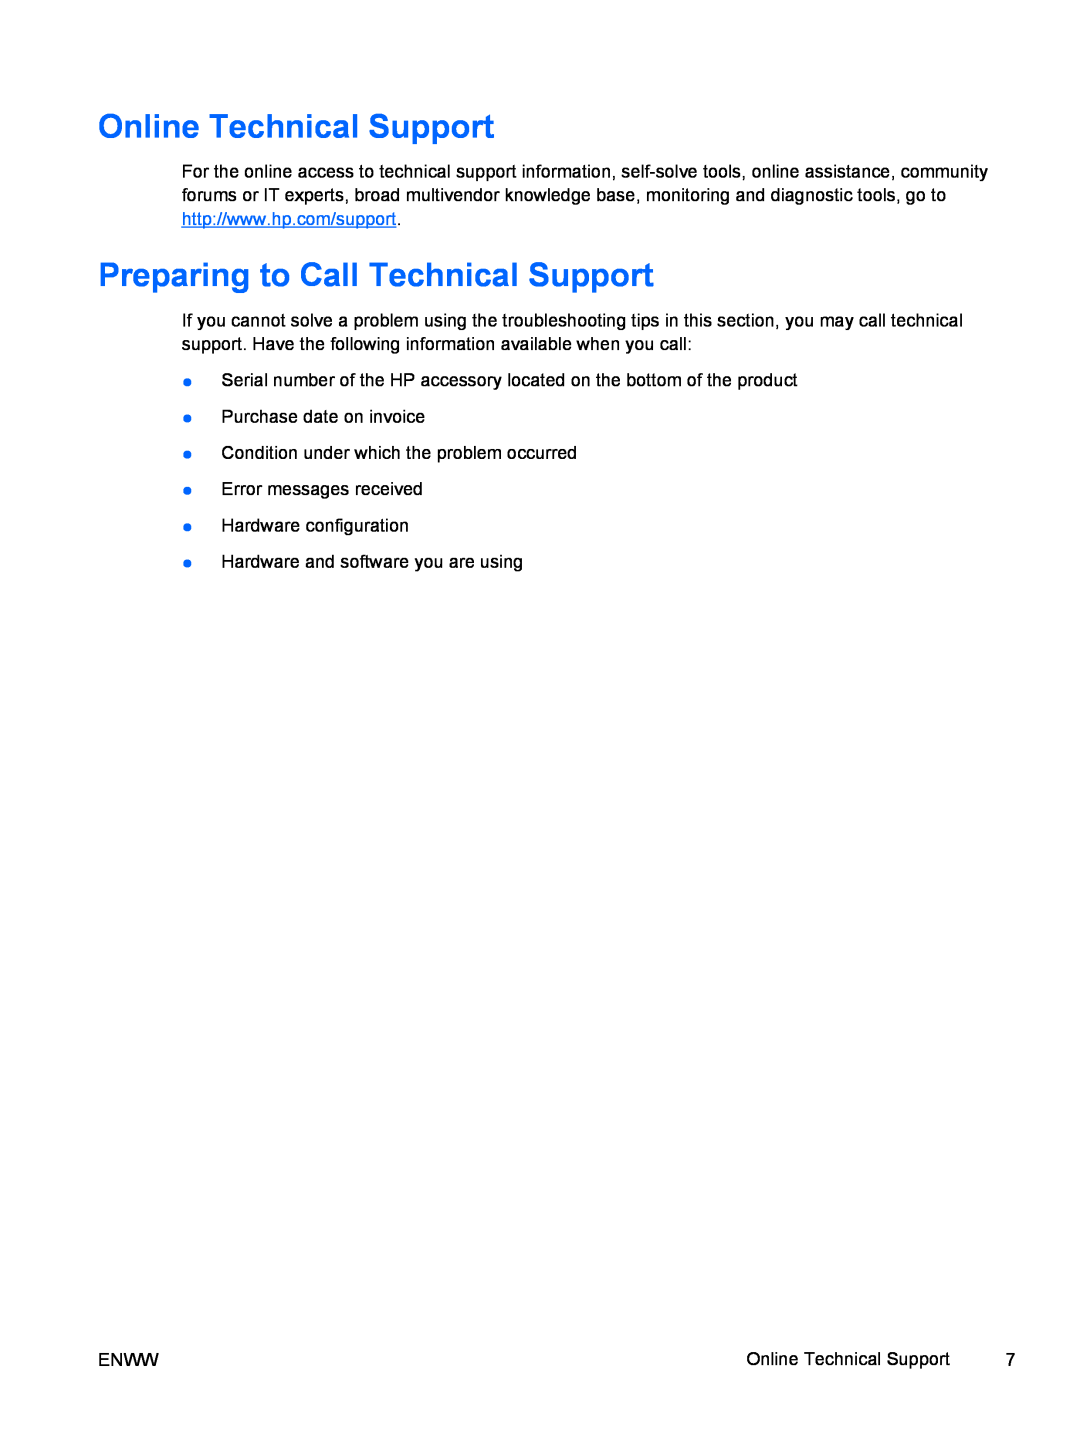 HP 8000 tower manual Online Technical Support, Preparing to Call Technical Support 